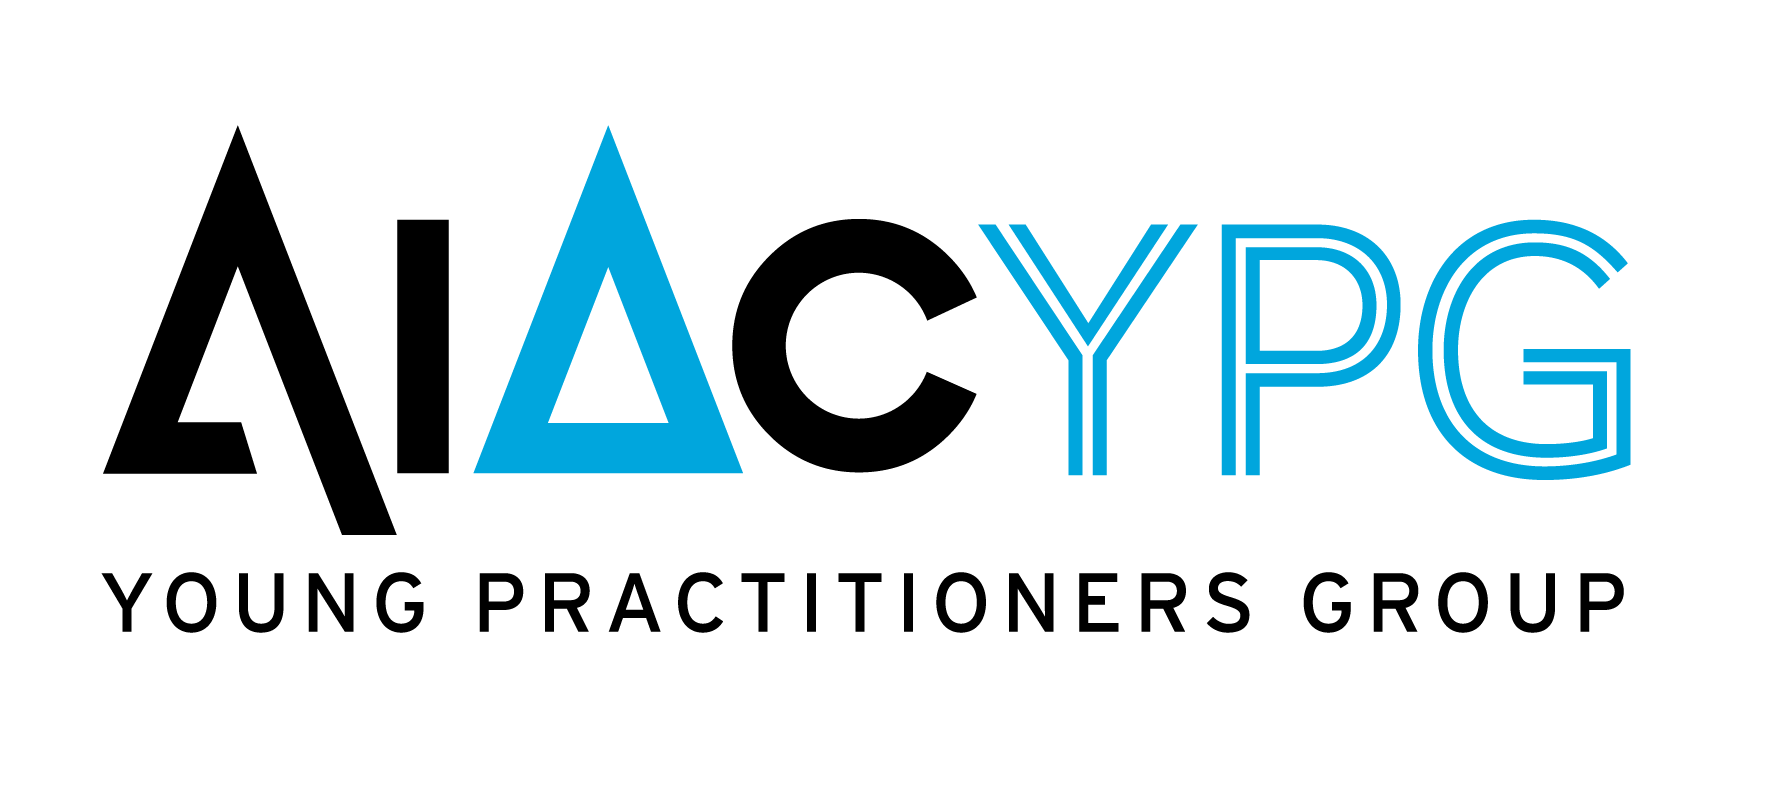 AIAC Young Practitioners Group (AIAC YPG)